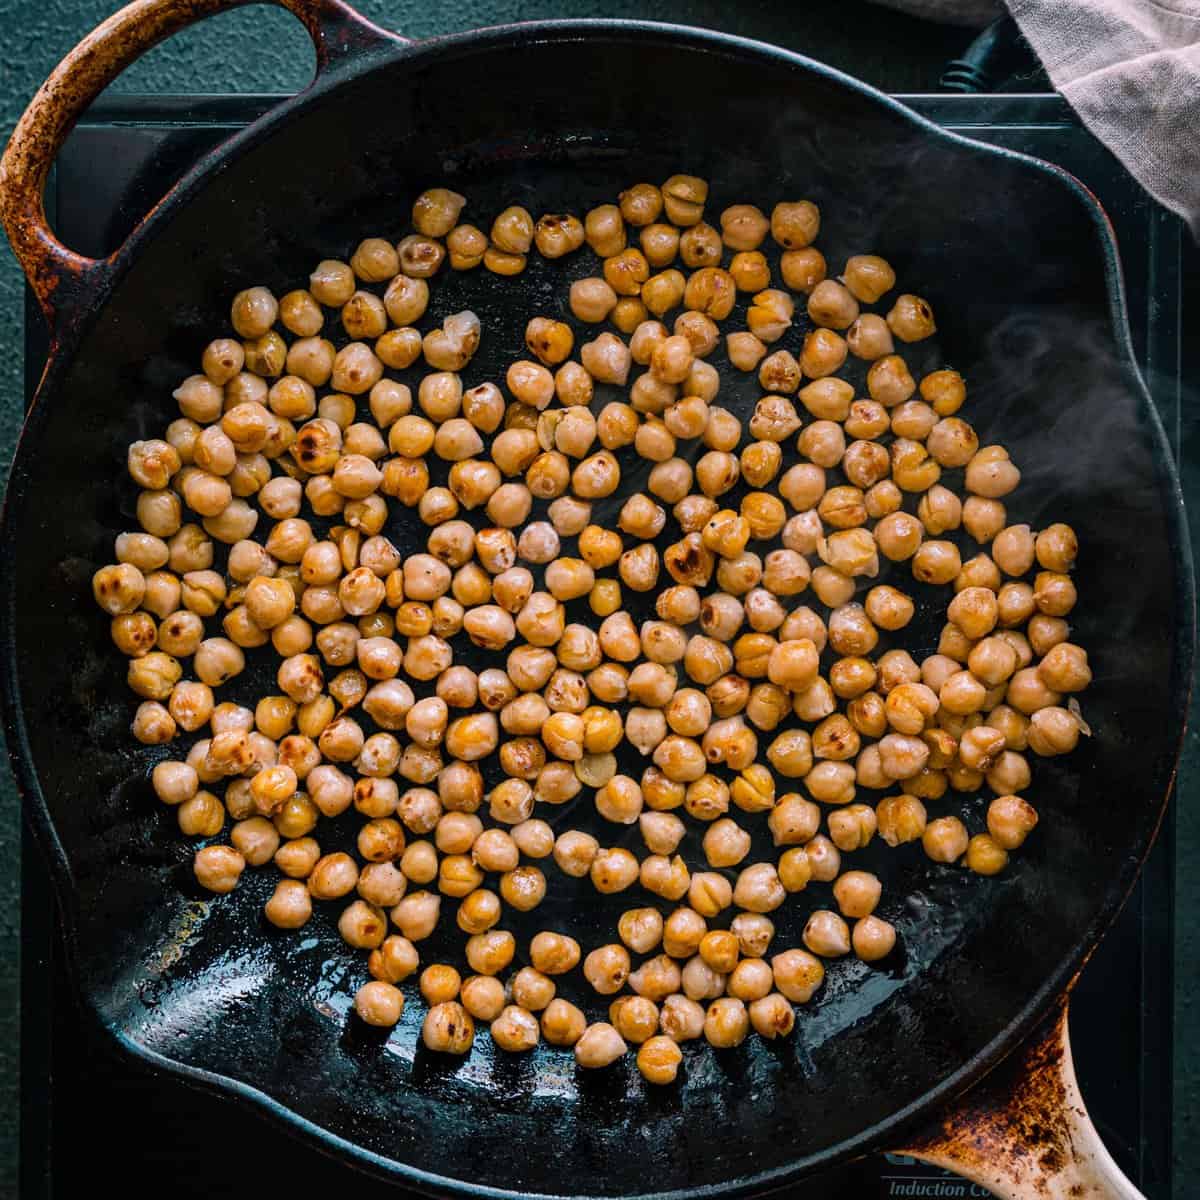 pan-frying chickpeas in a skillet